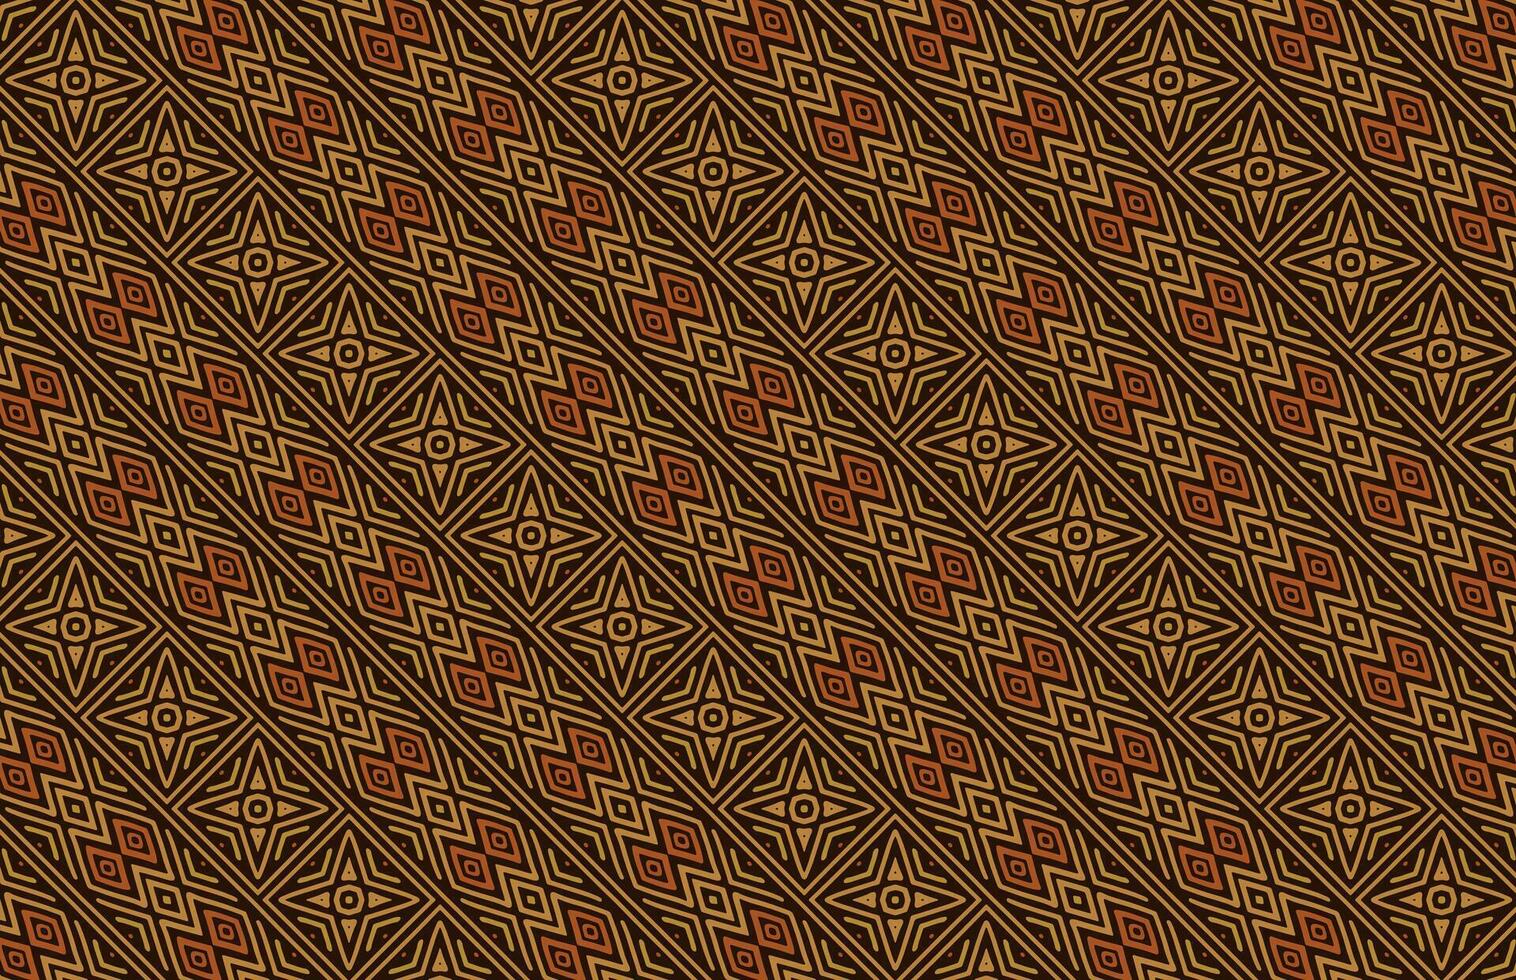 Abstract Aztac Grunge Fabric Pattern vector